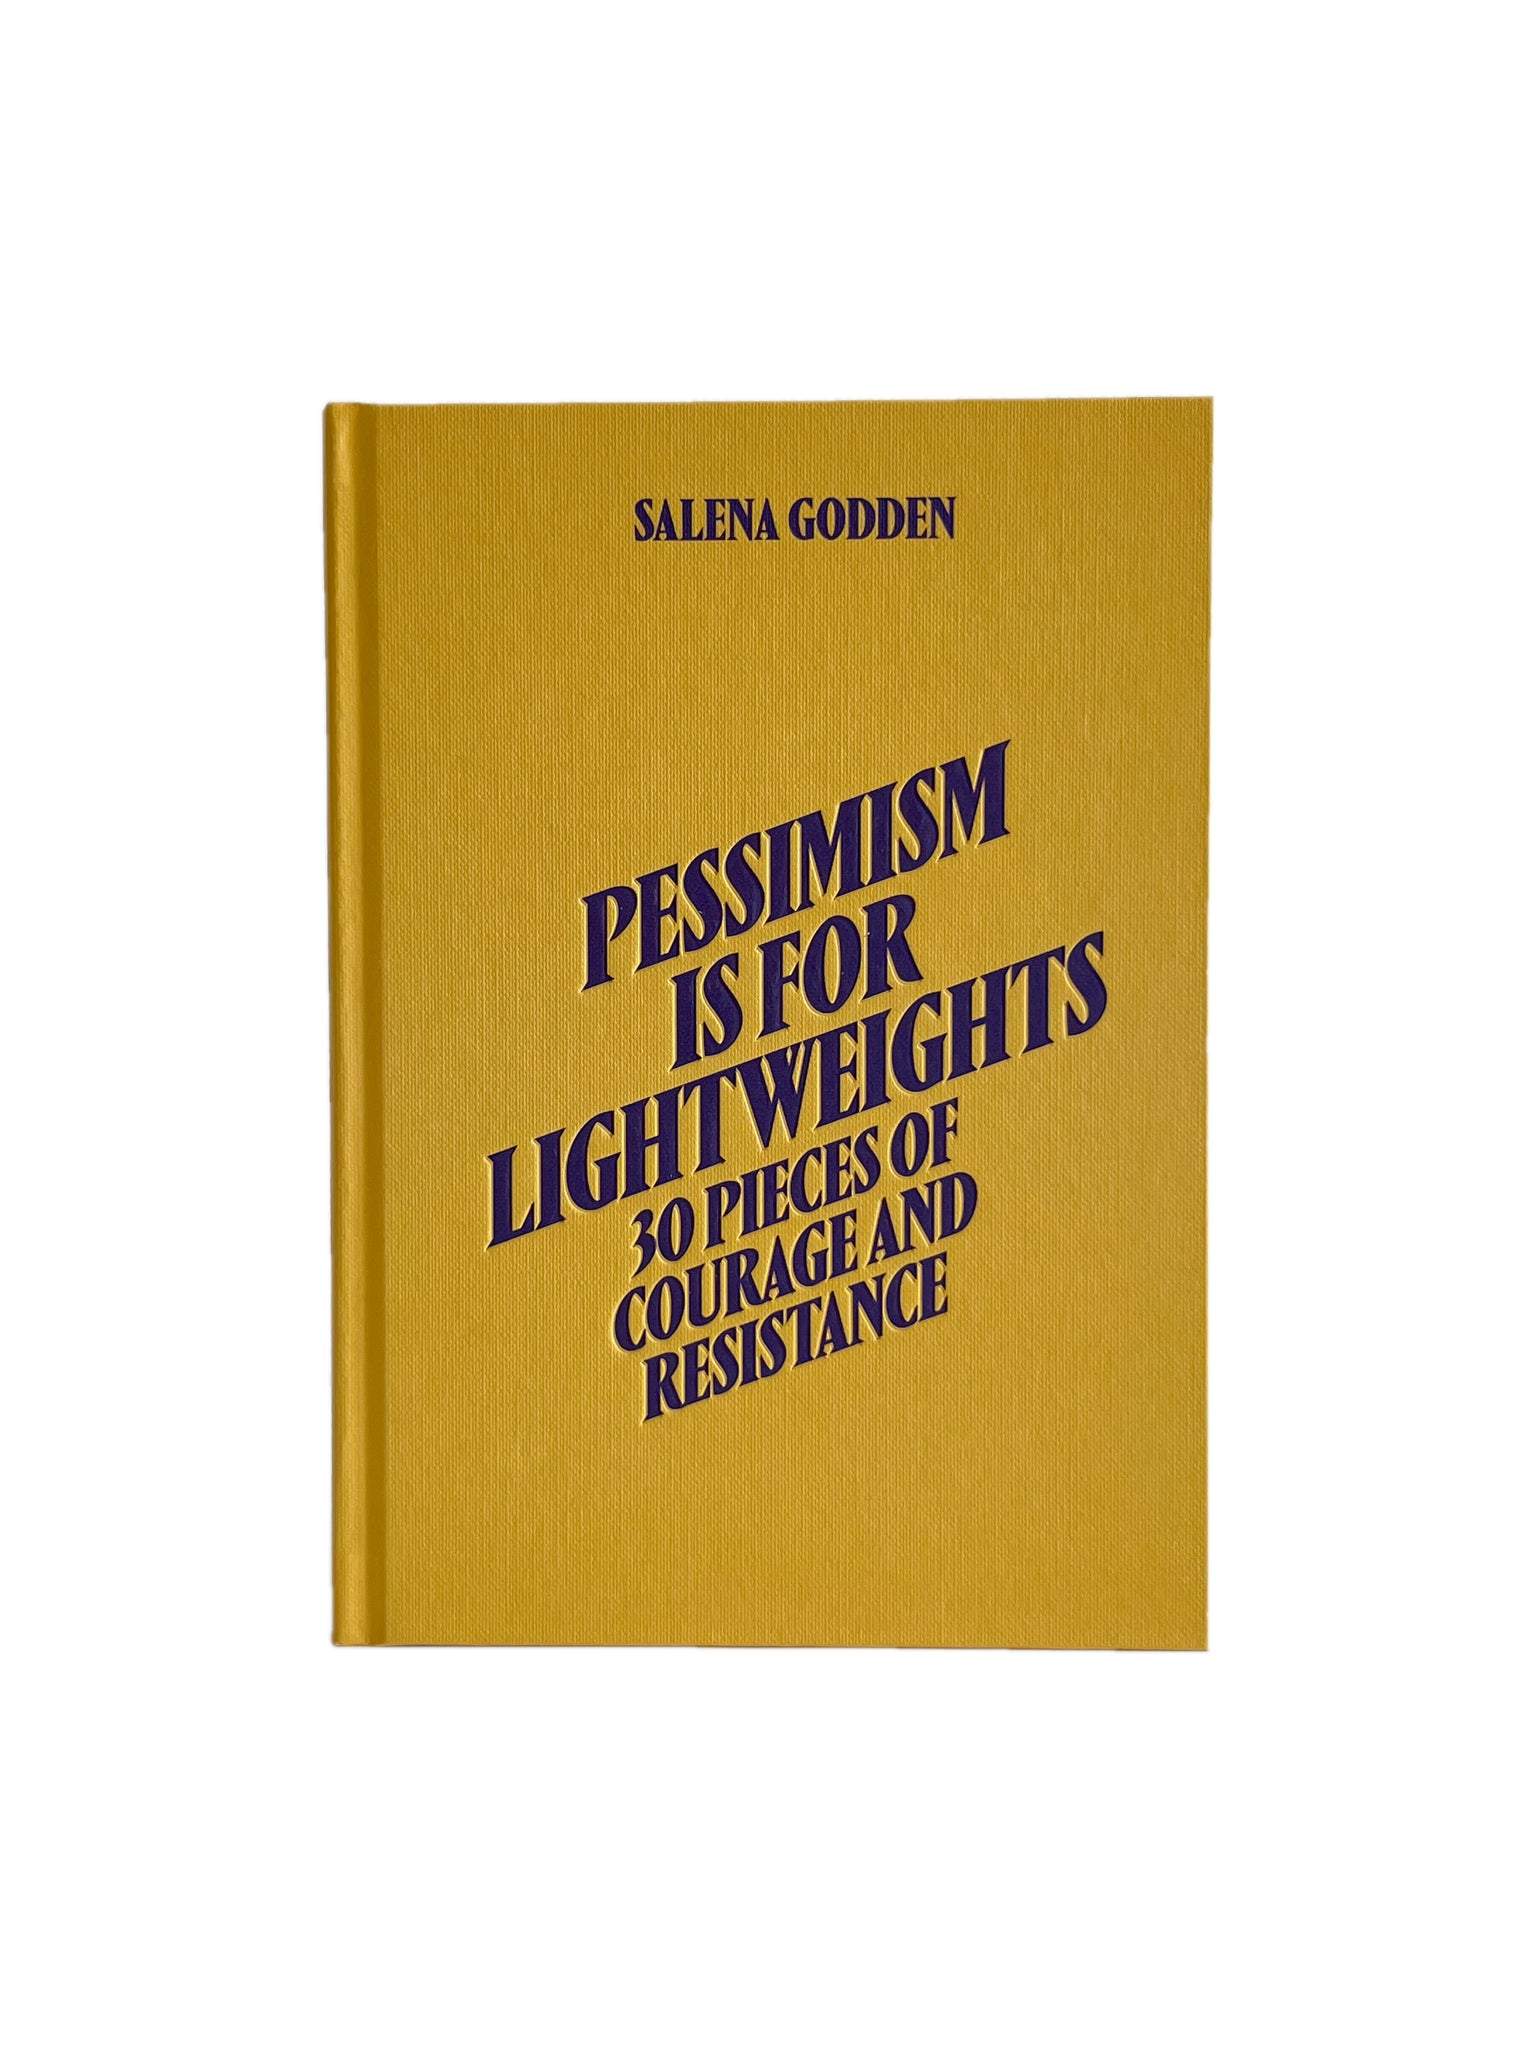 Pessimism is For Lightweights - 30 Pieces of Courage and Resistance